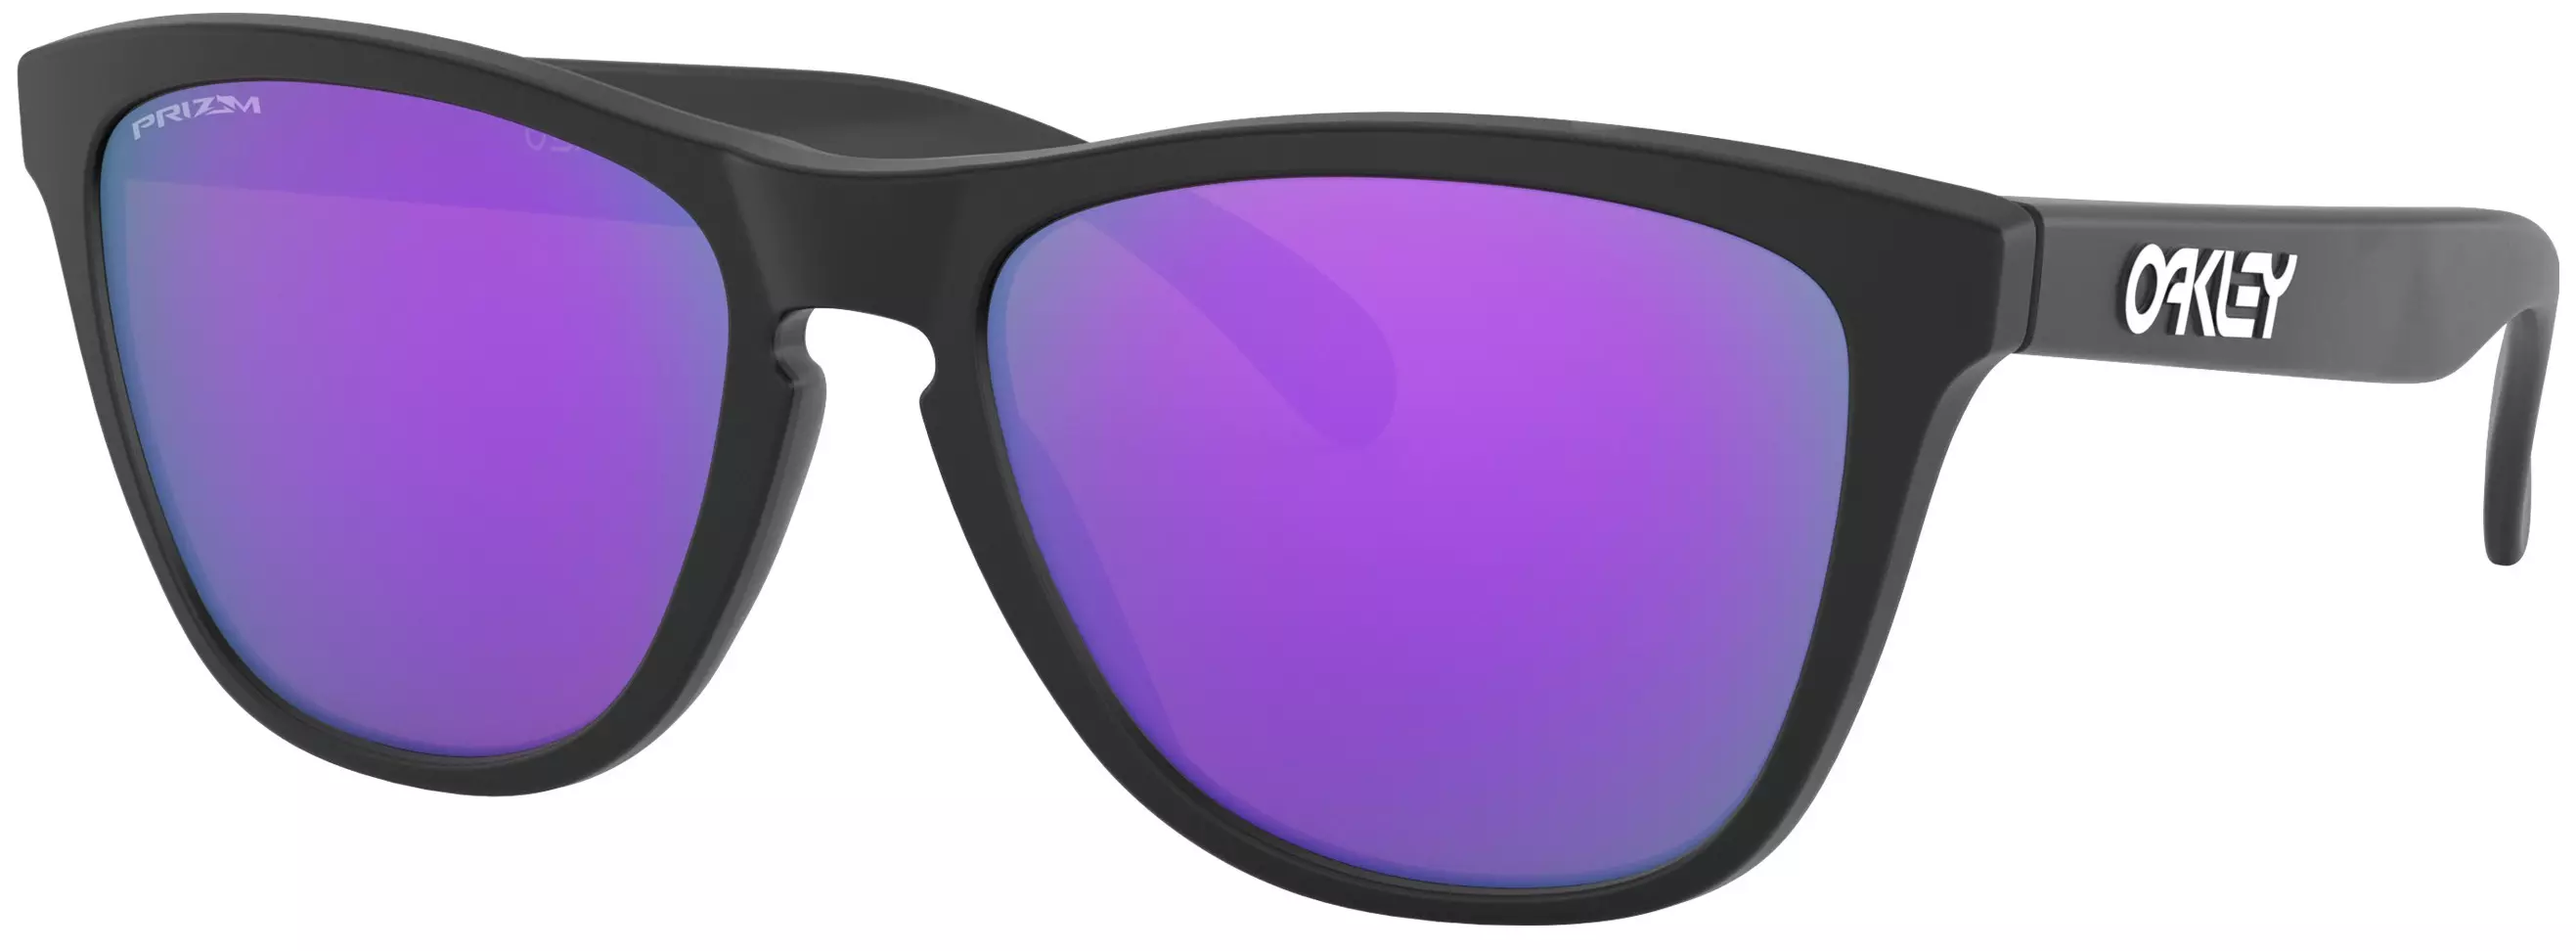 Sunglasses Oakley Frogskins OO9013-H655 | Shop Extreme Vital